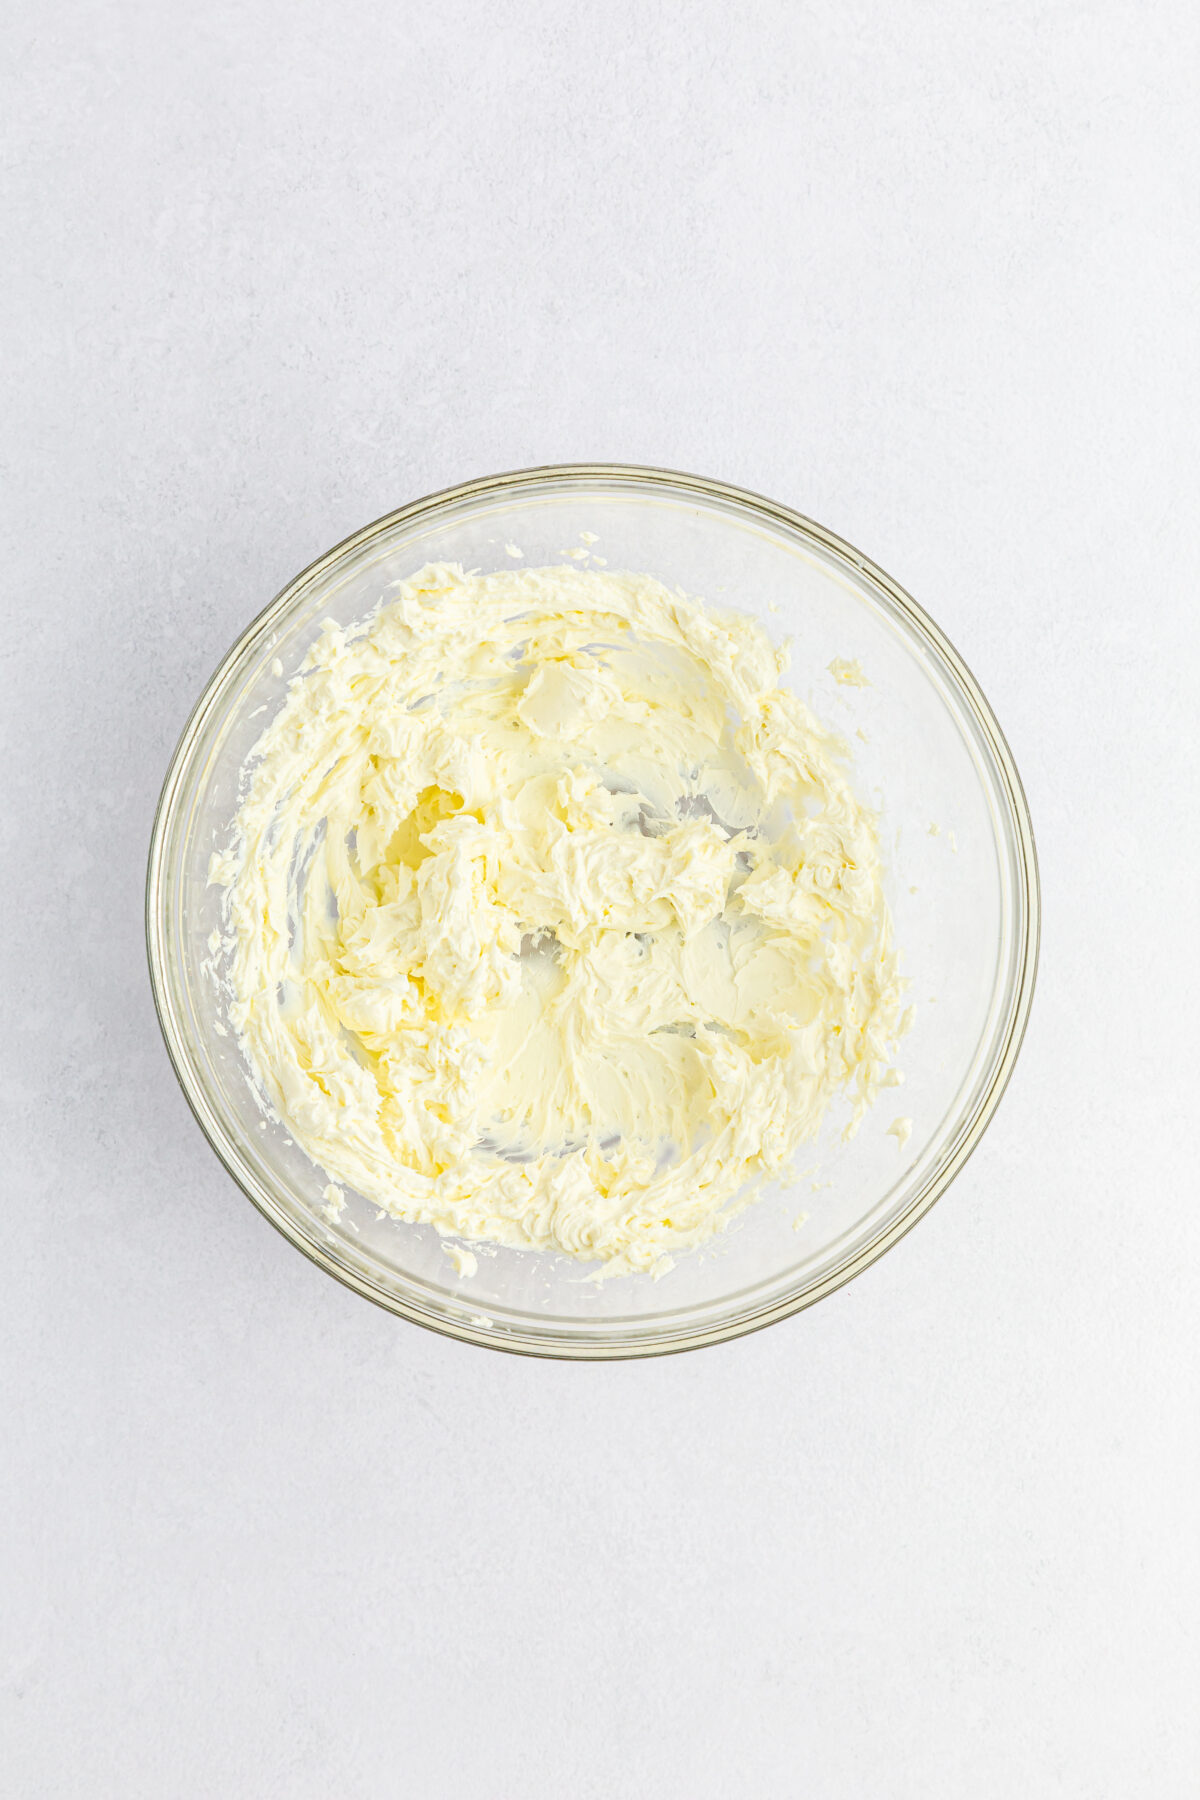 Cream cheese beaten until smooth in a mixing bowl.